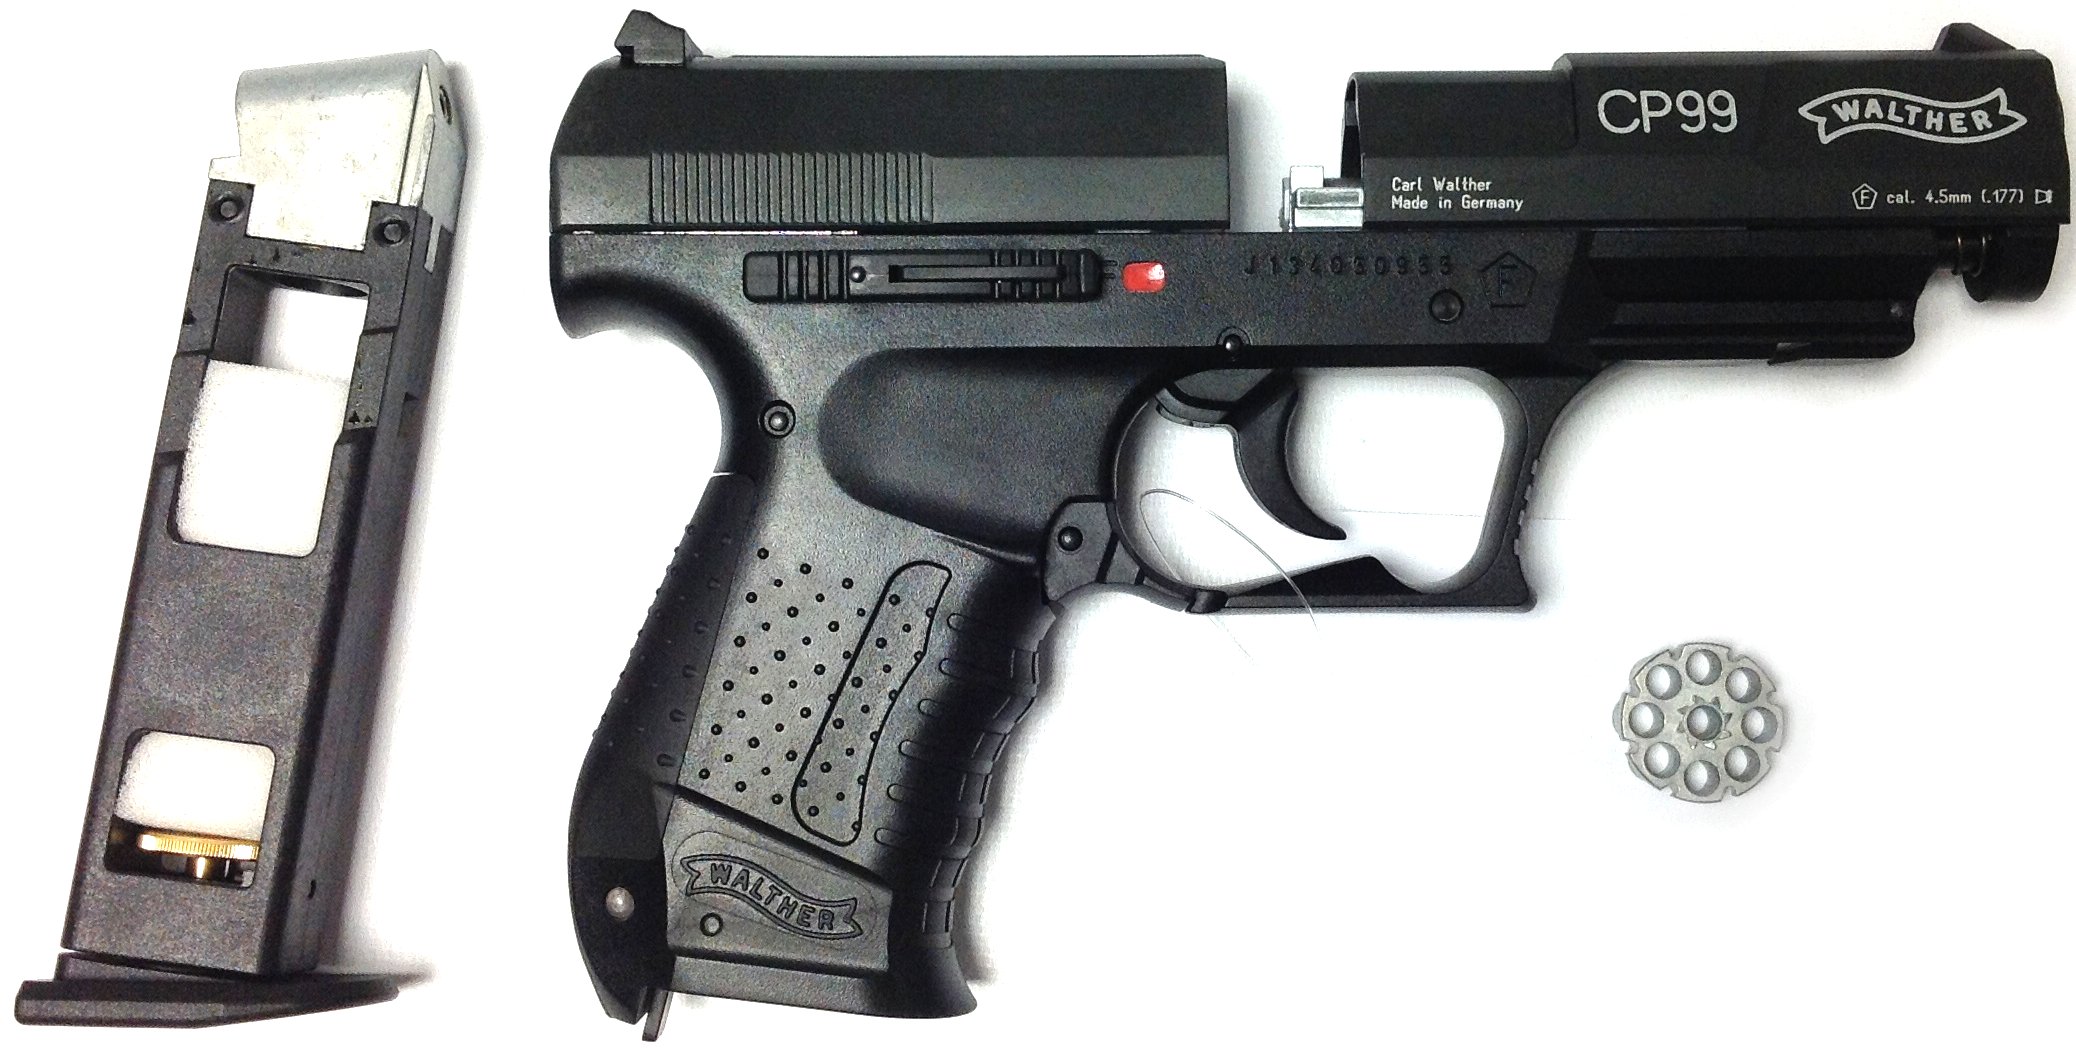 Walther CP99 .177 CO2 Air Pistol For Sale UK